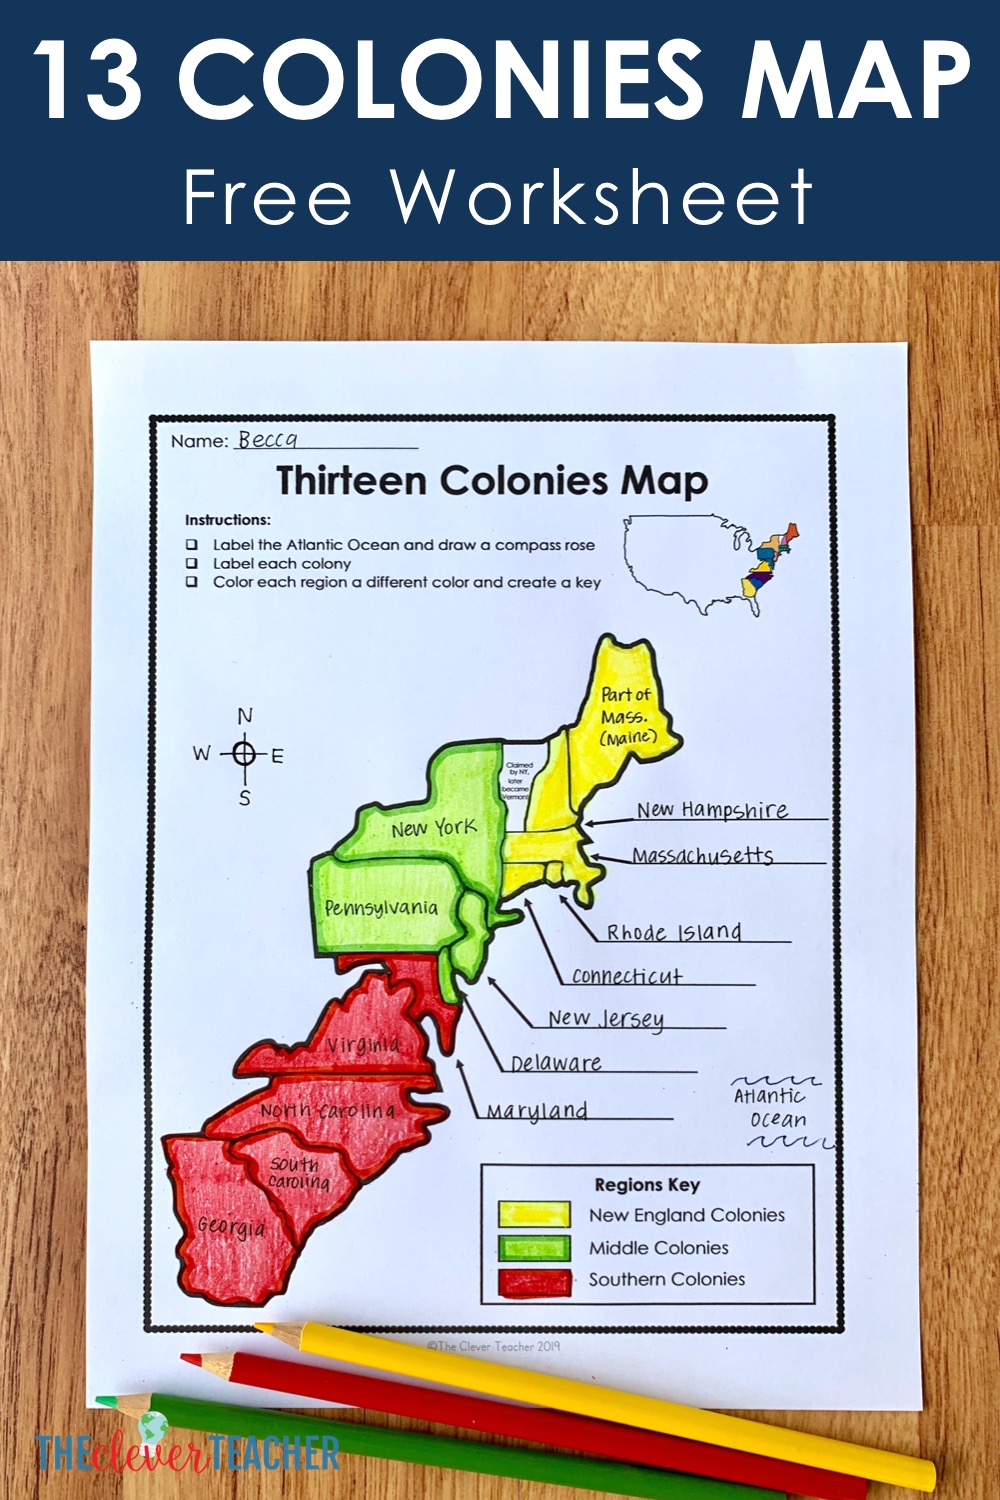 Colonies free map worksheet and lesson for students